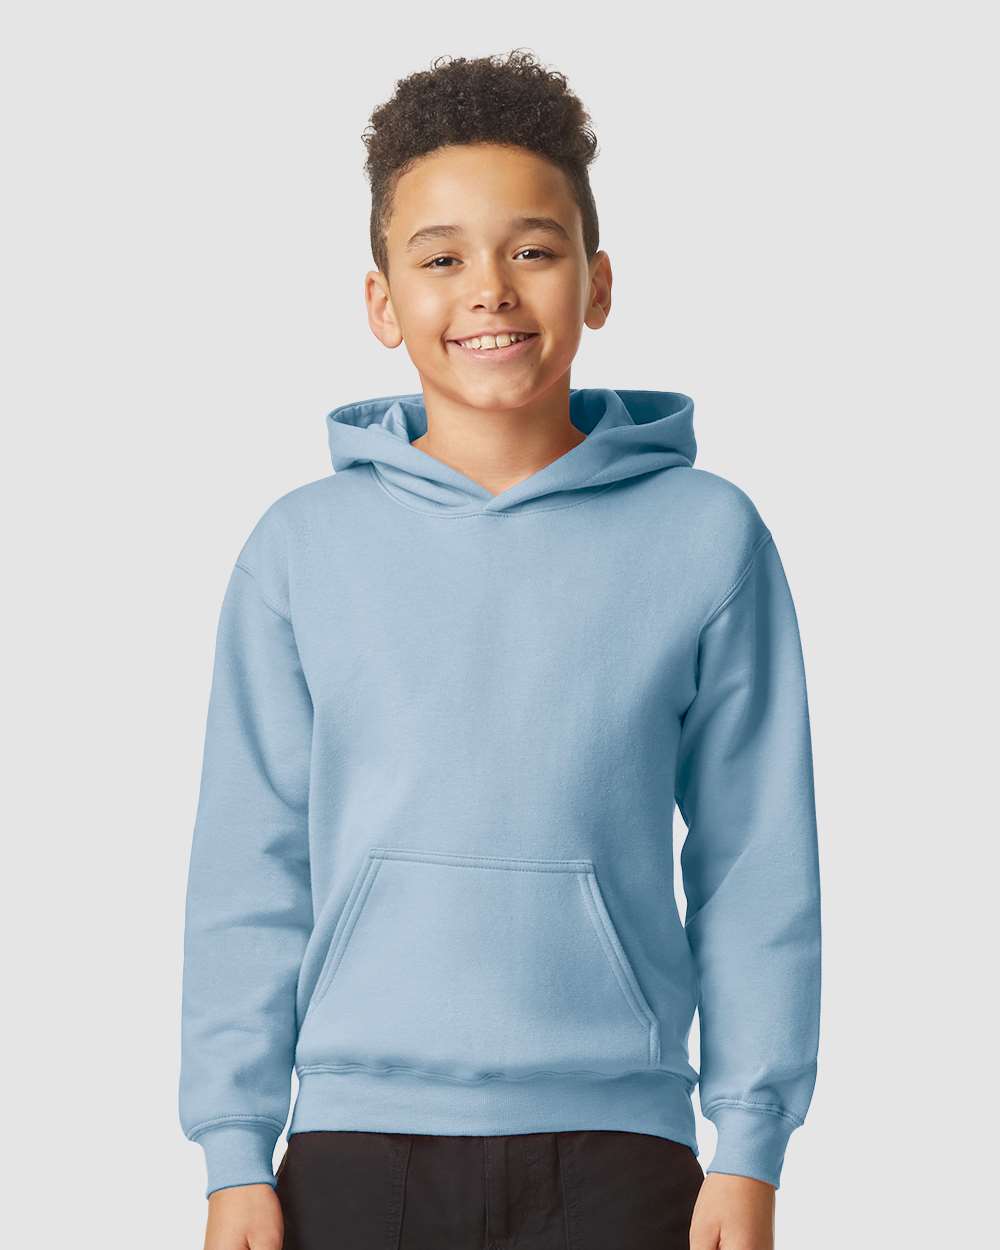 Gildan&#xAE; - Youth Midweight Hooded Sweatshirt - SF500B | 8.4 Oz./yd&#xB2;, 80/20 Ring-Spun Cotton/polyester, 20 Singles | Energize Style in Our Hooded Sweatshirt - Where Comfort Meets Trendsetting Fashion for the Next Generation